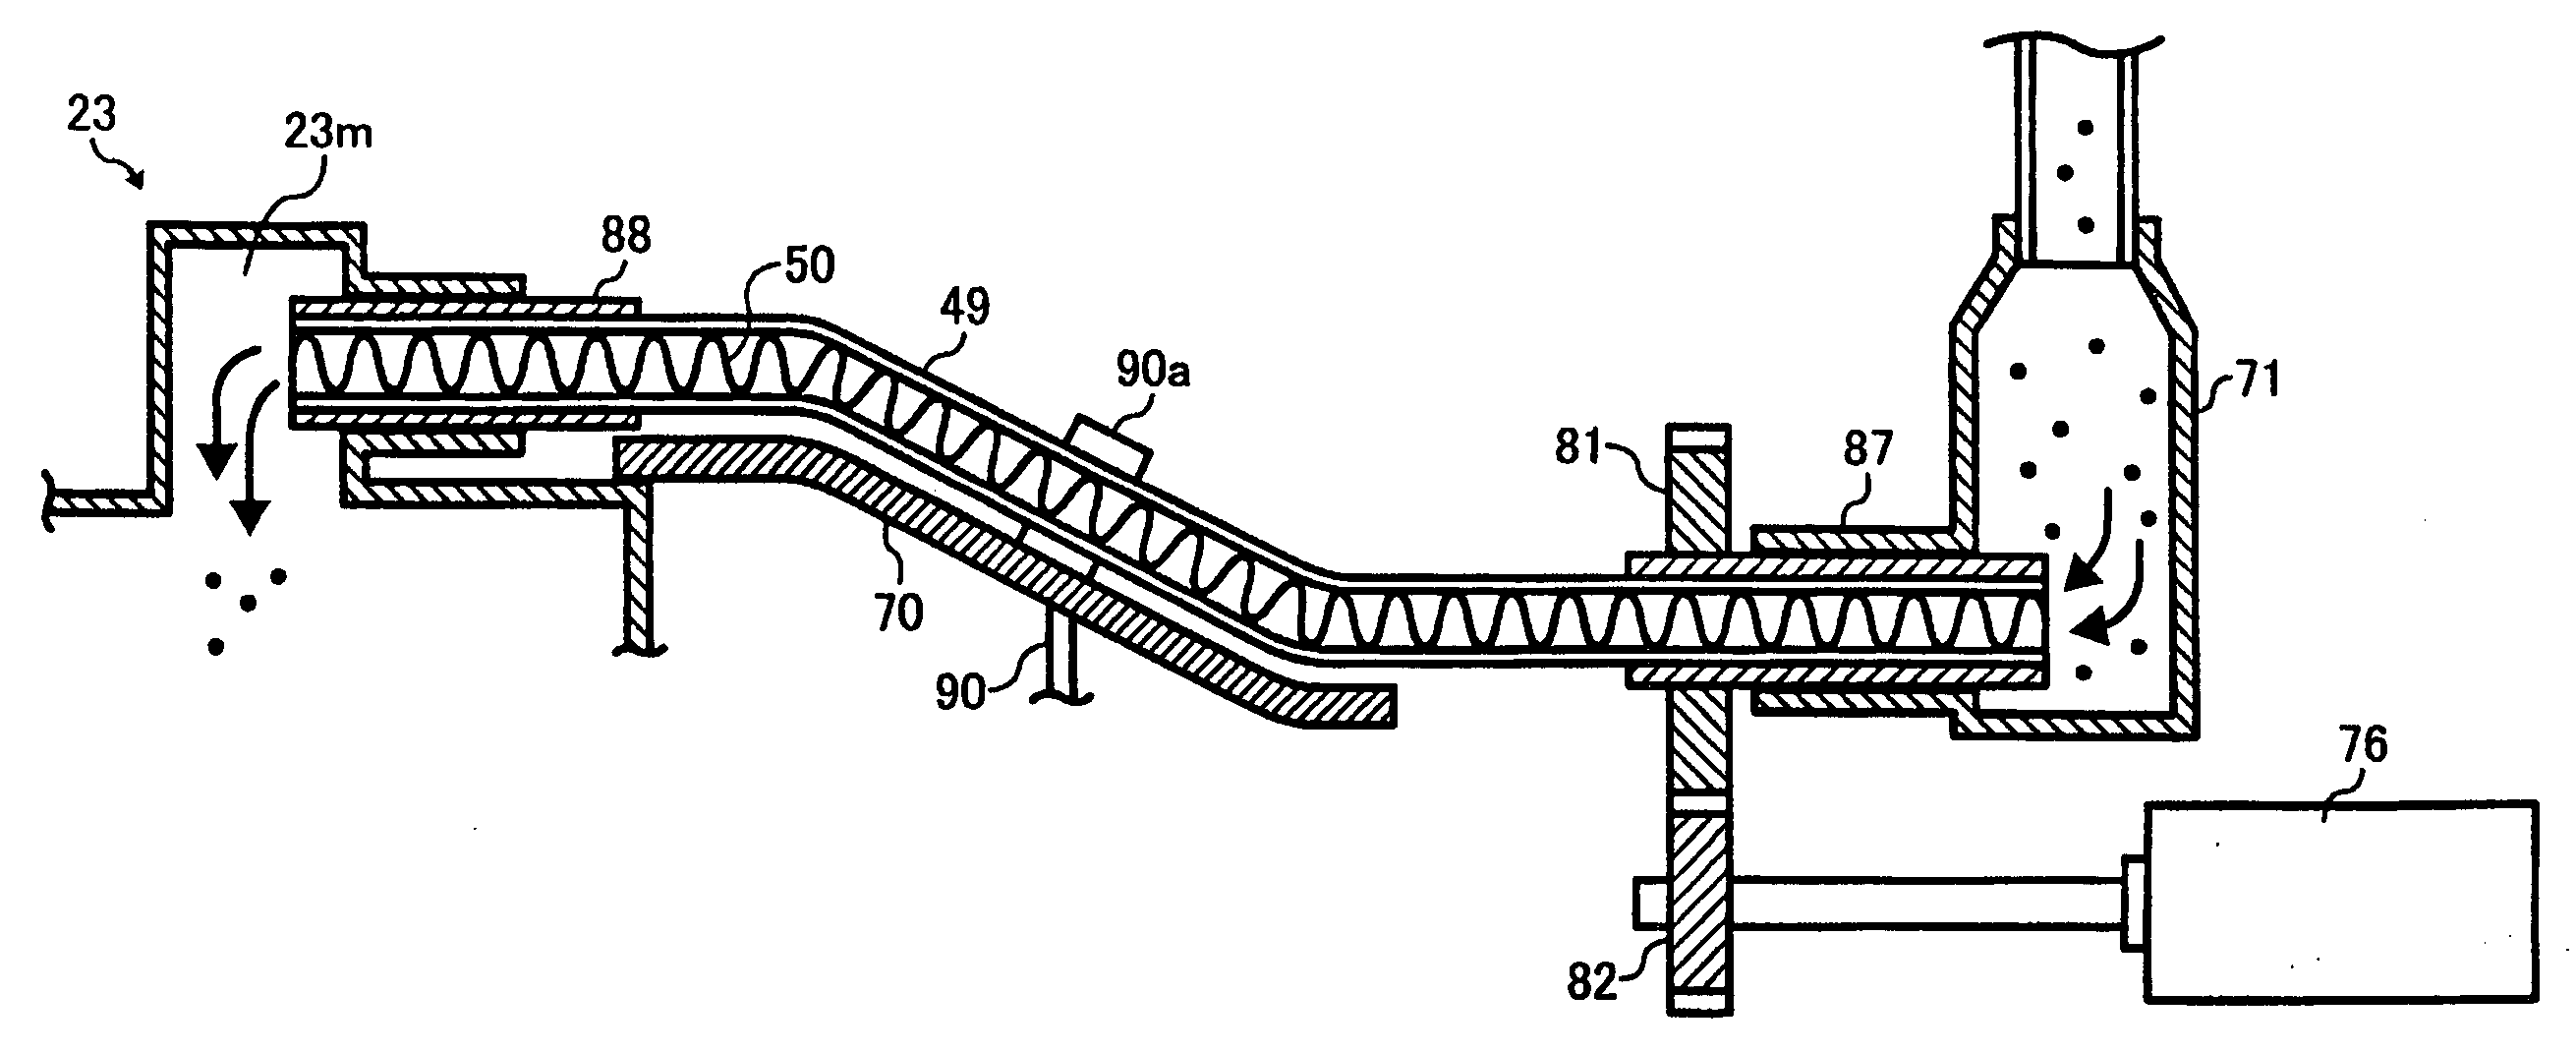 Image forming apparatus having an improved developer conveying system